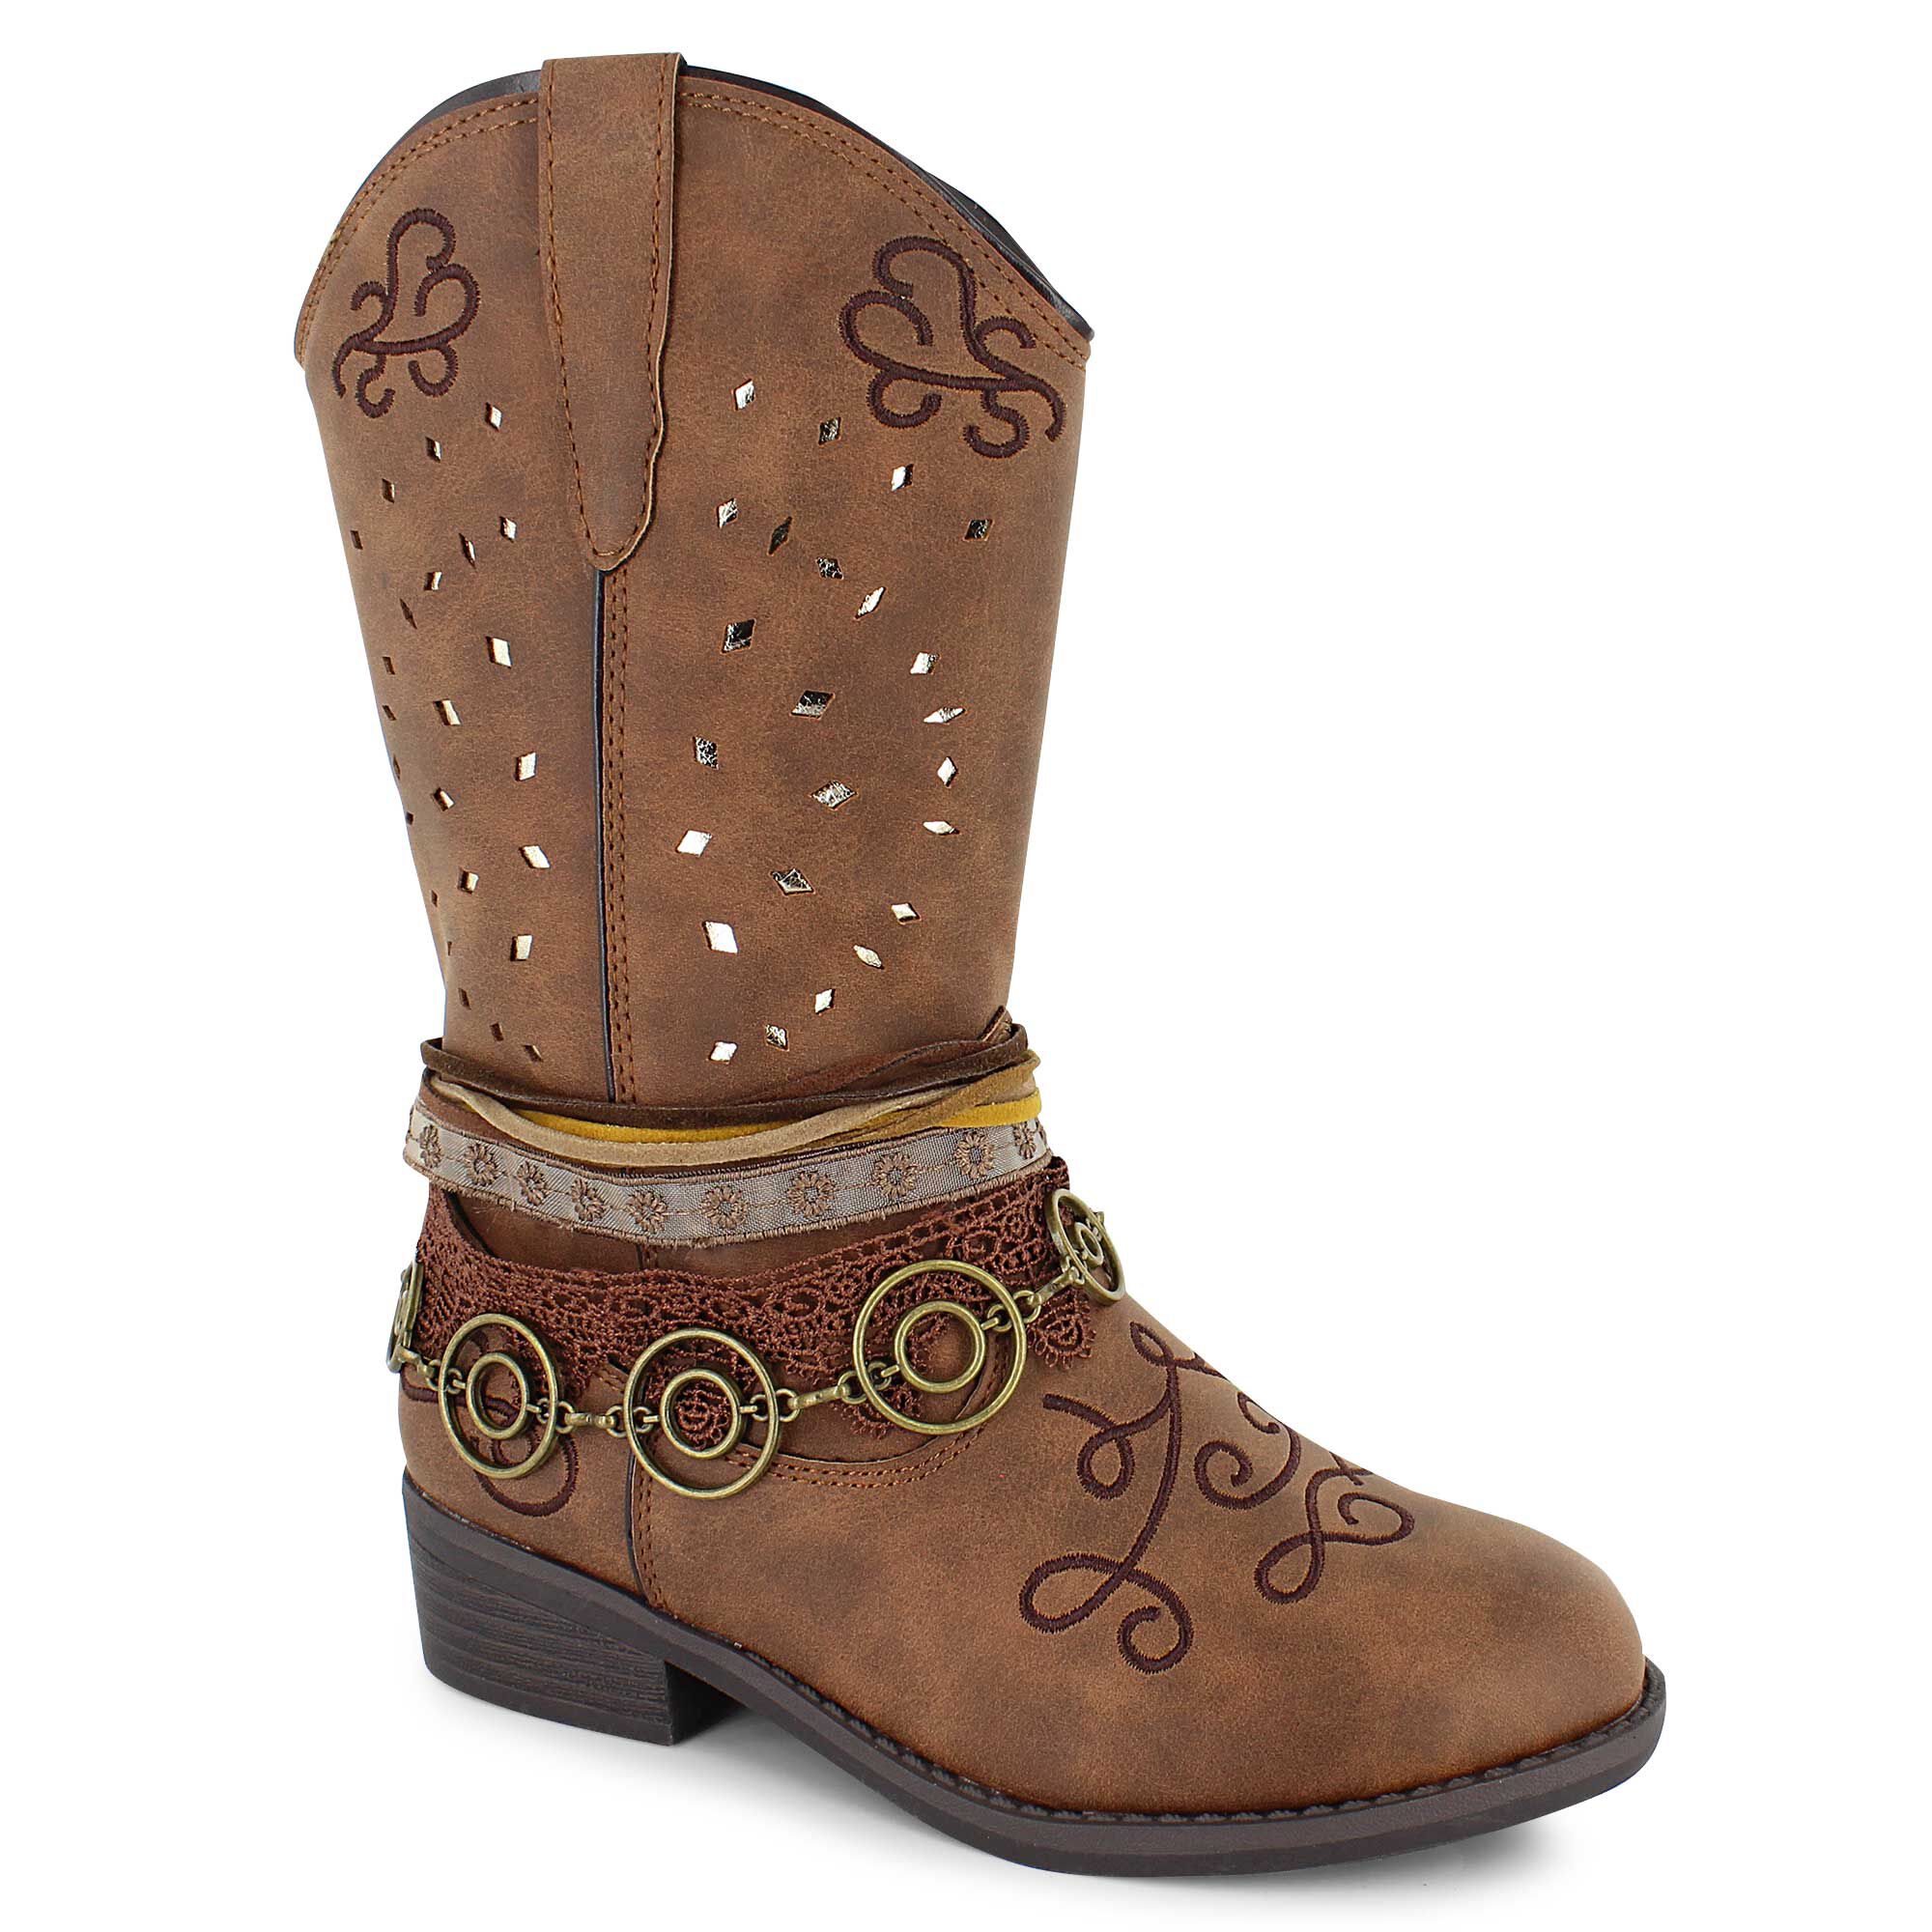 Rodeo Ropers Jessie Western Girl Ankle Brown Boots Rubber Sole 237048 US Size 3 